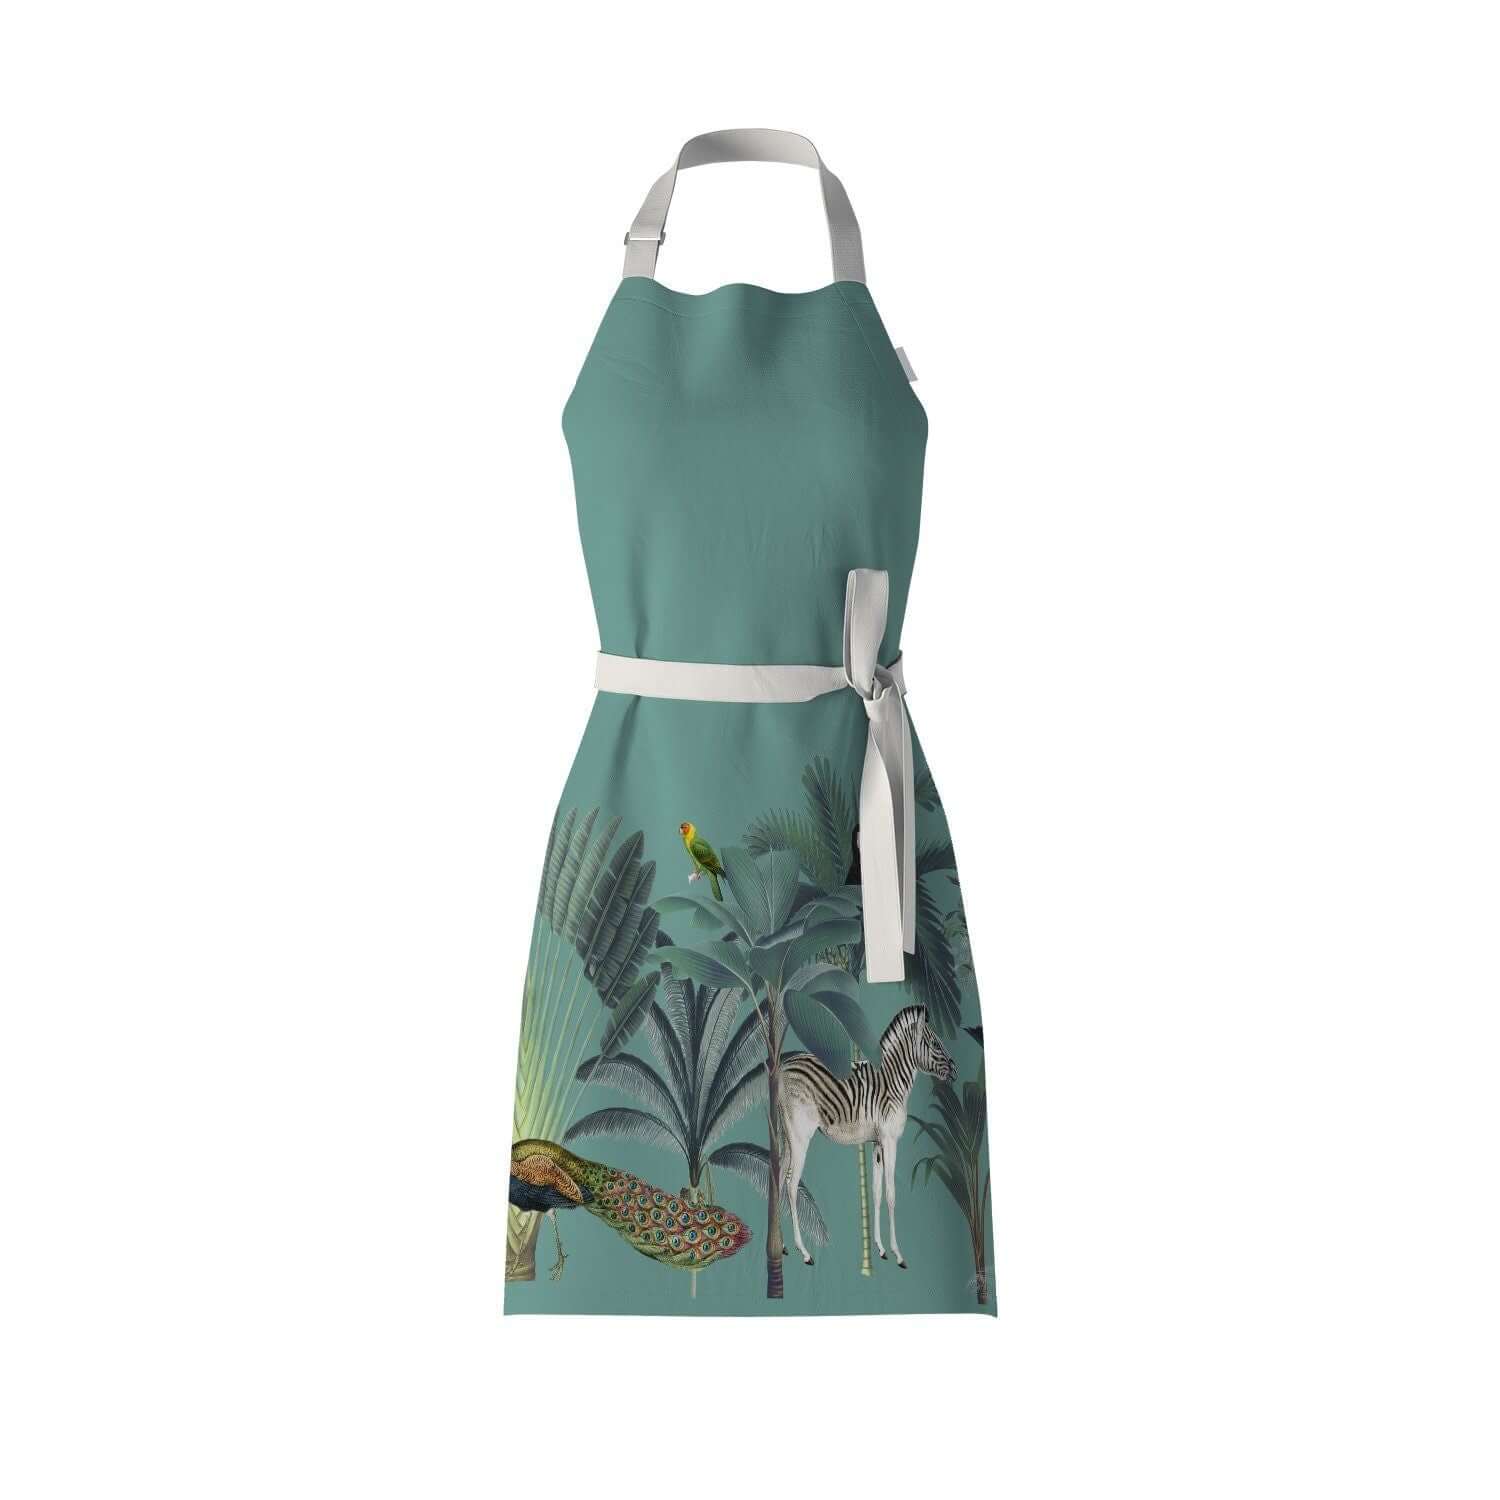 green kitchen apron with darwin's menagerie scene including a zebra, peacock, leopard and palm trees. The contrasting neck and wasit ties. Bib Apron from Mustard and Gray